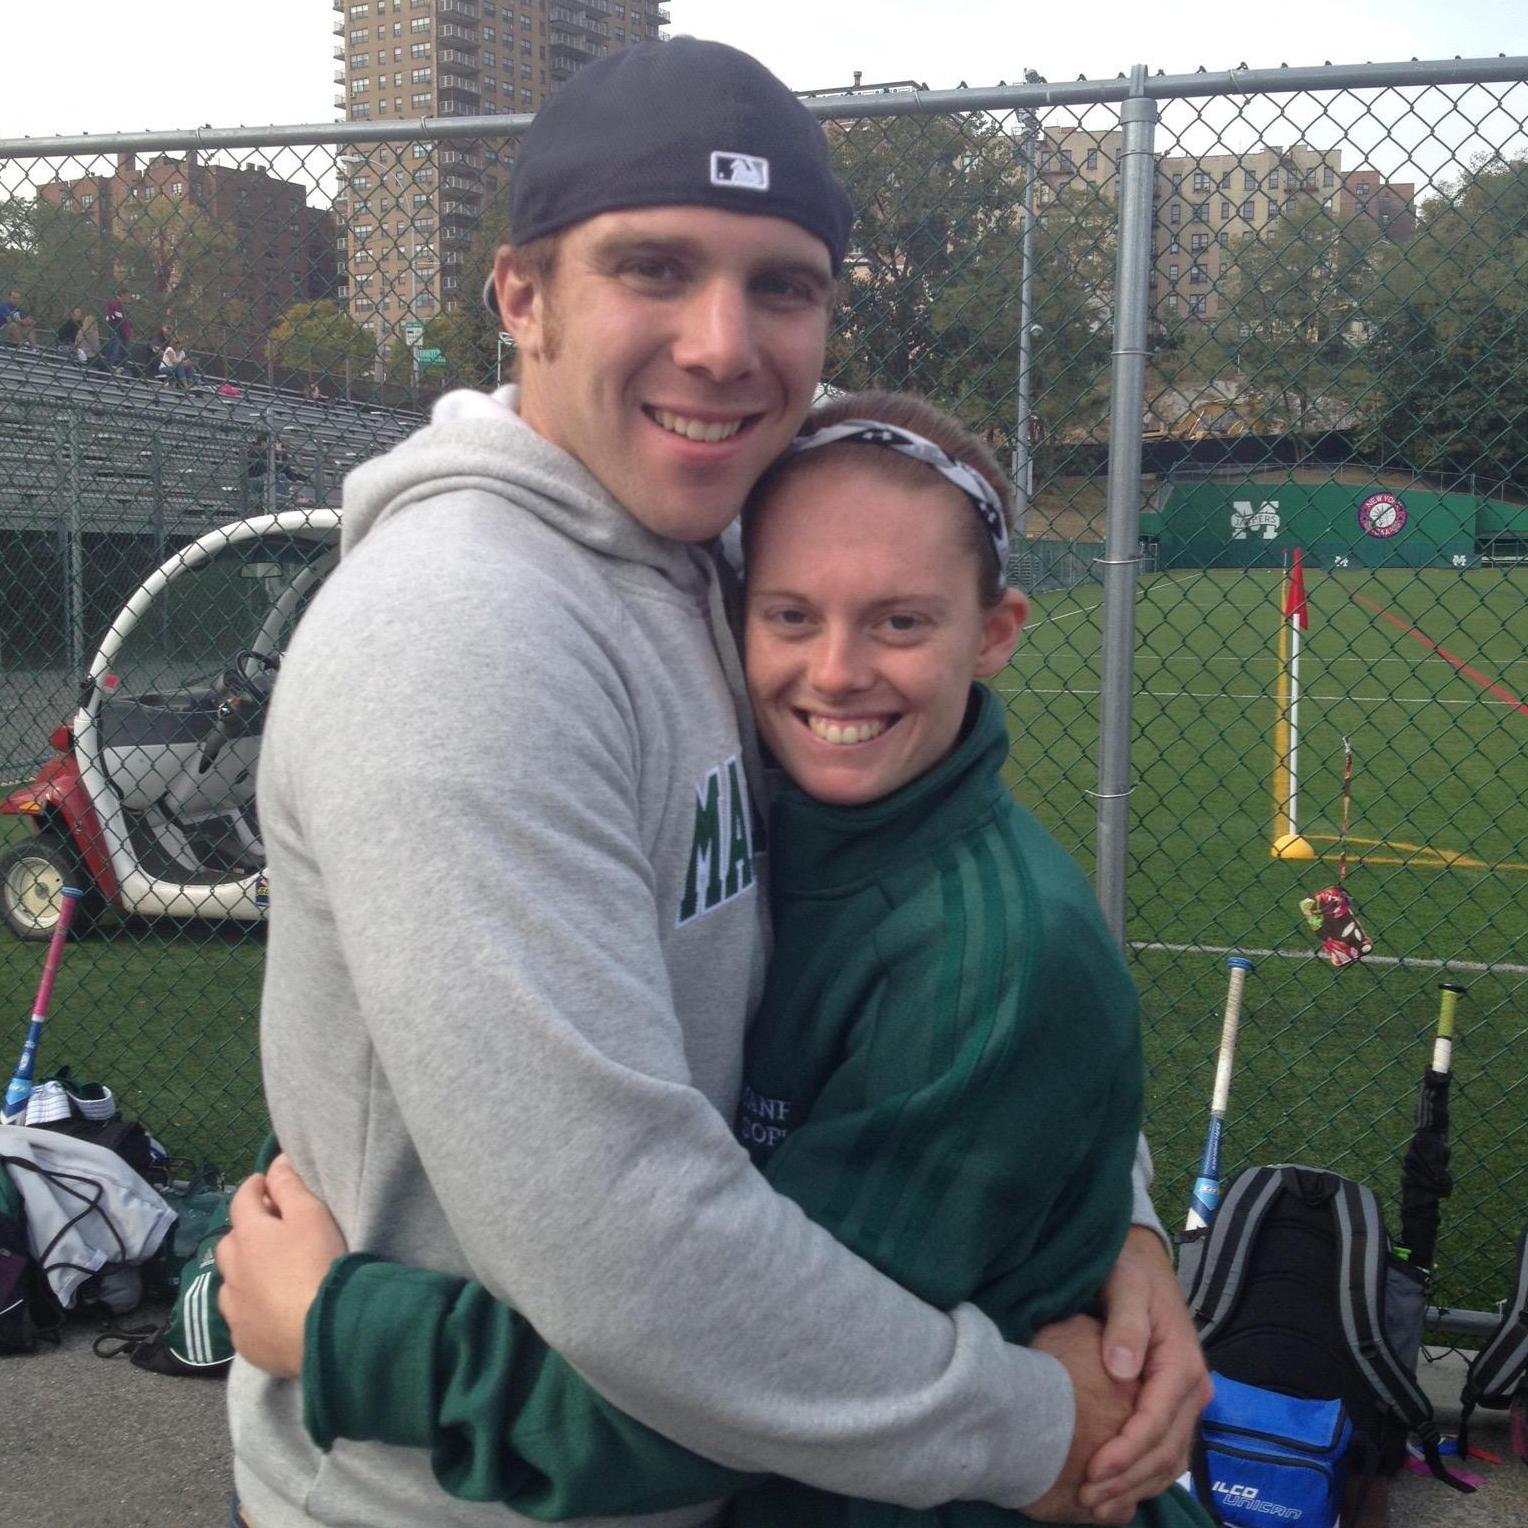 October 2013: Steve makes his first visit to Manhattan College to watch Em play Fall ball.